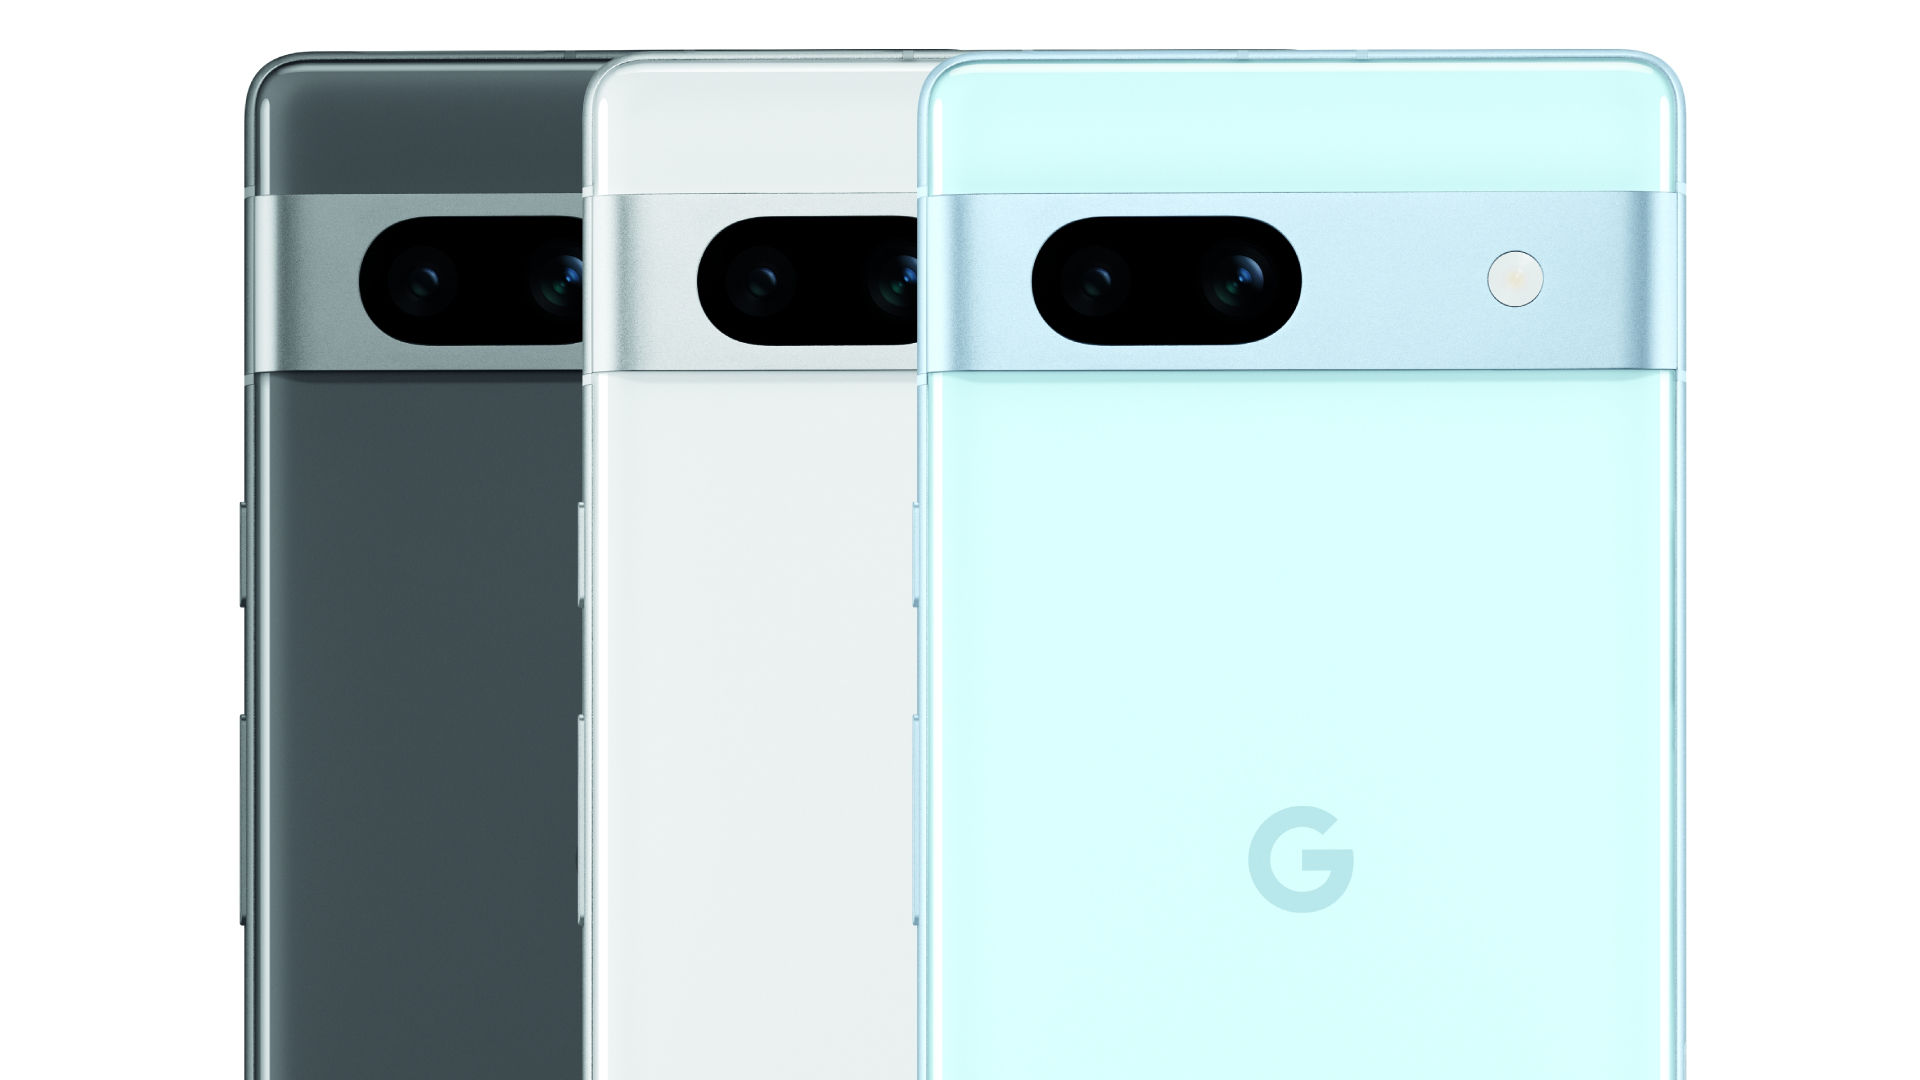 Google Pixel 7a Its Specs, Features, Launch Price And More